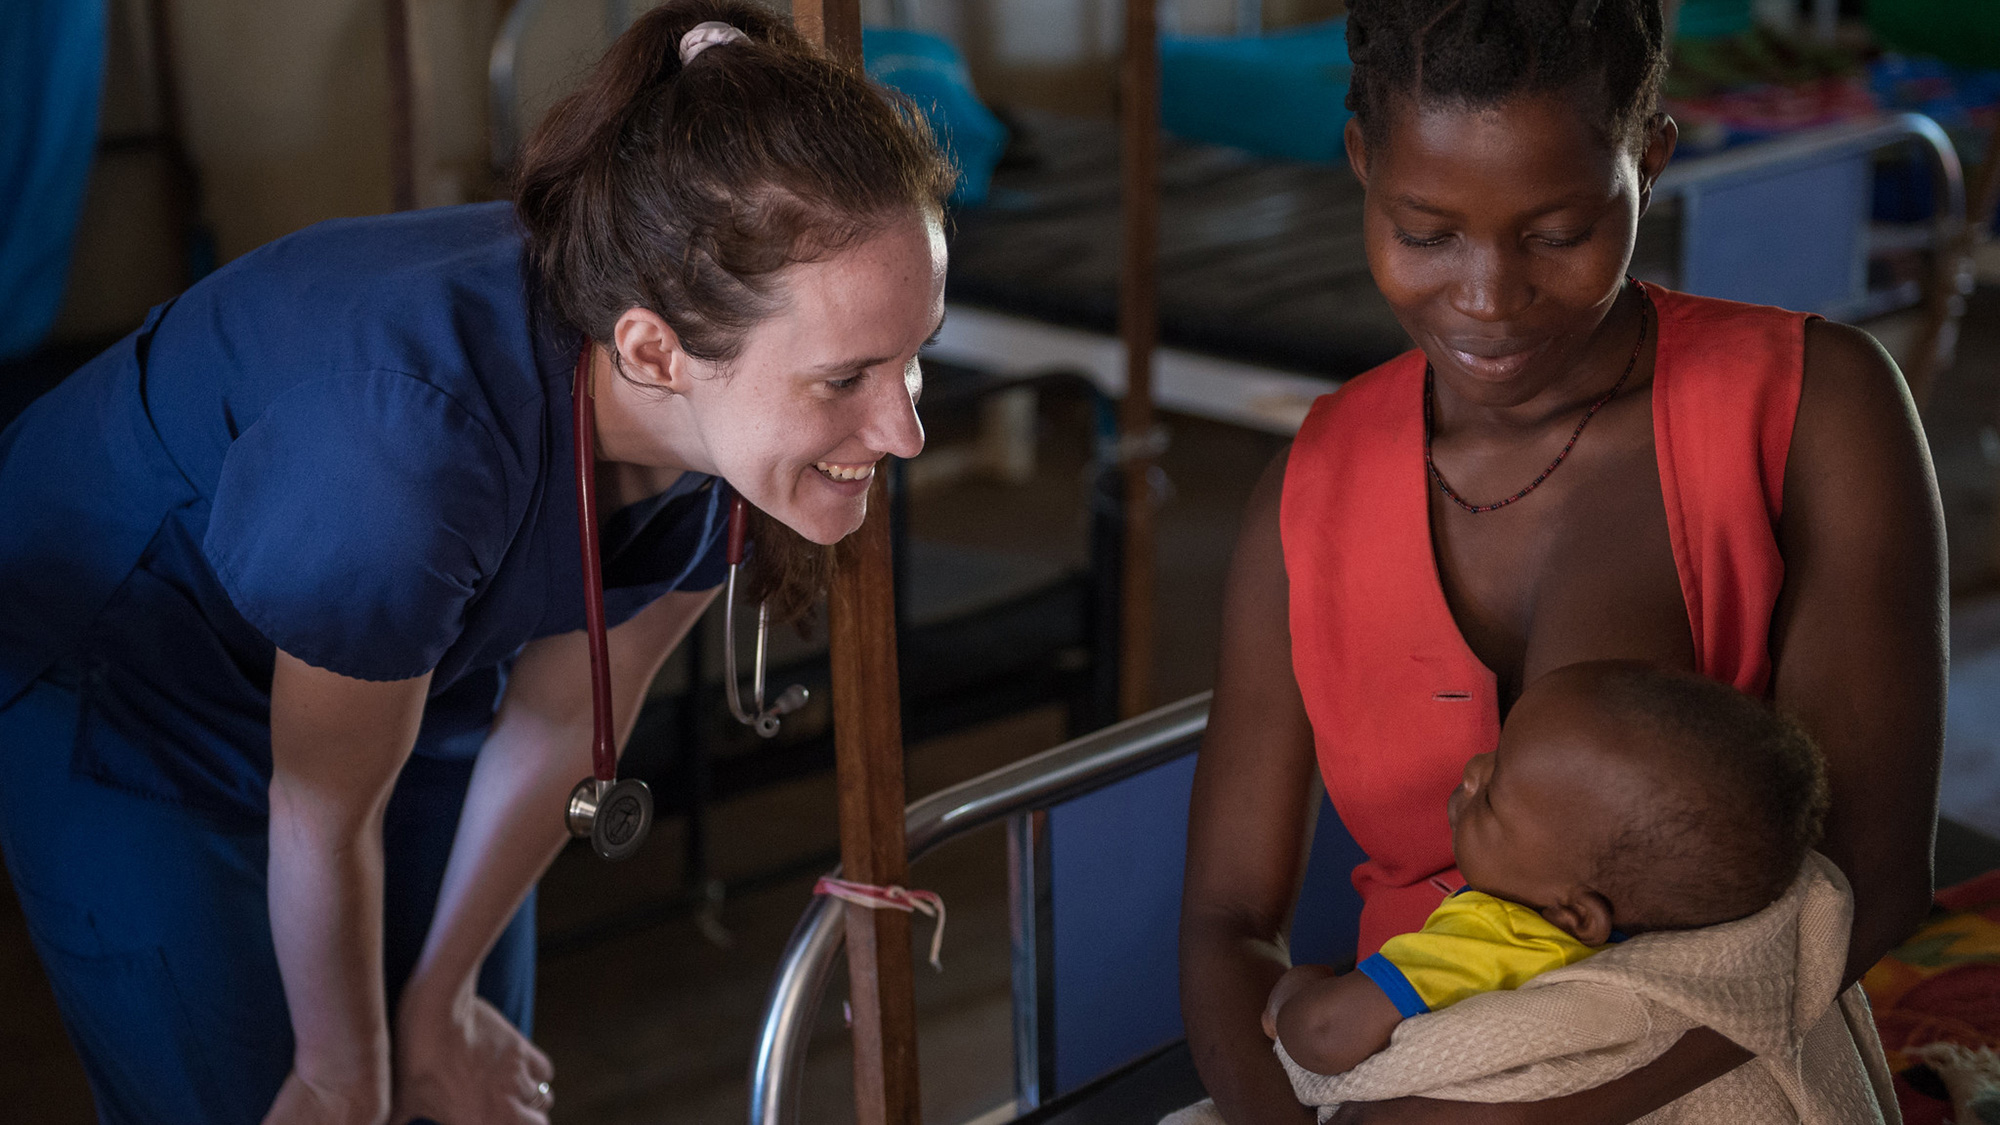 Sarah Rubino offers care to a patient at St. Therese Hospital in South Sudan 